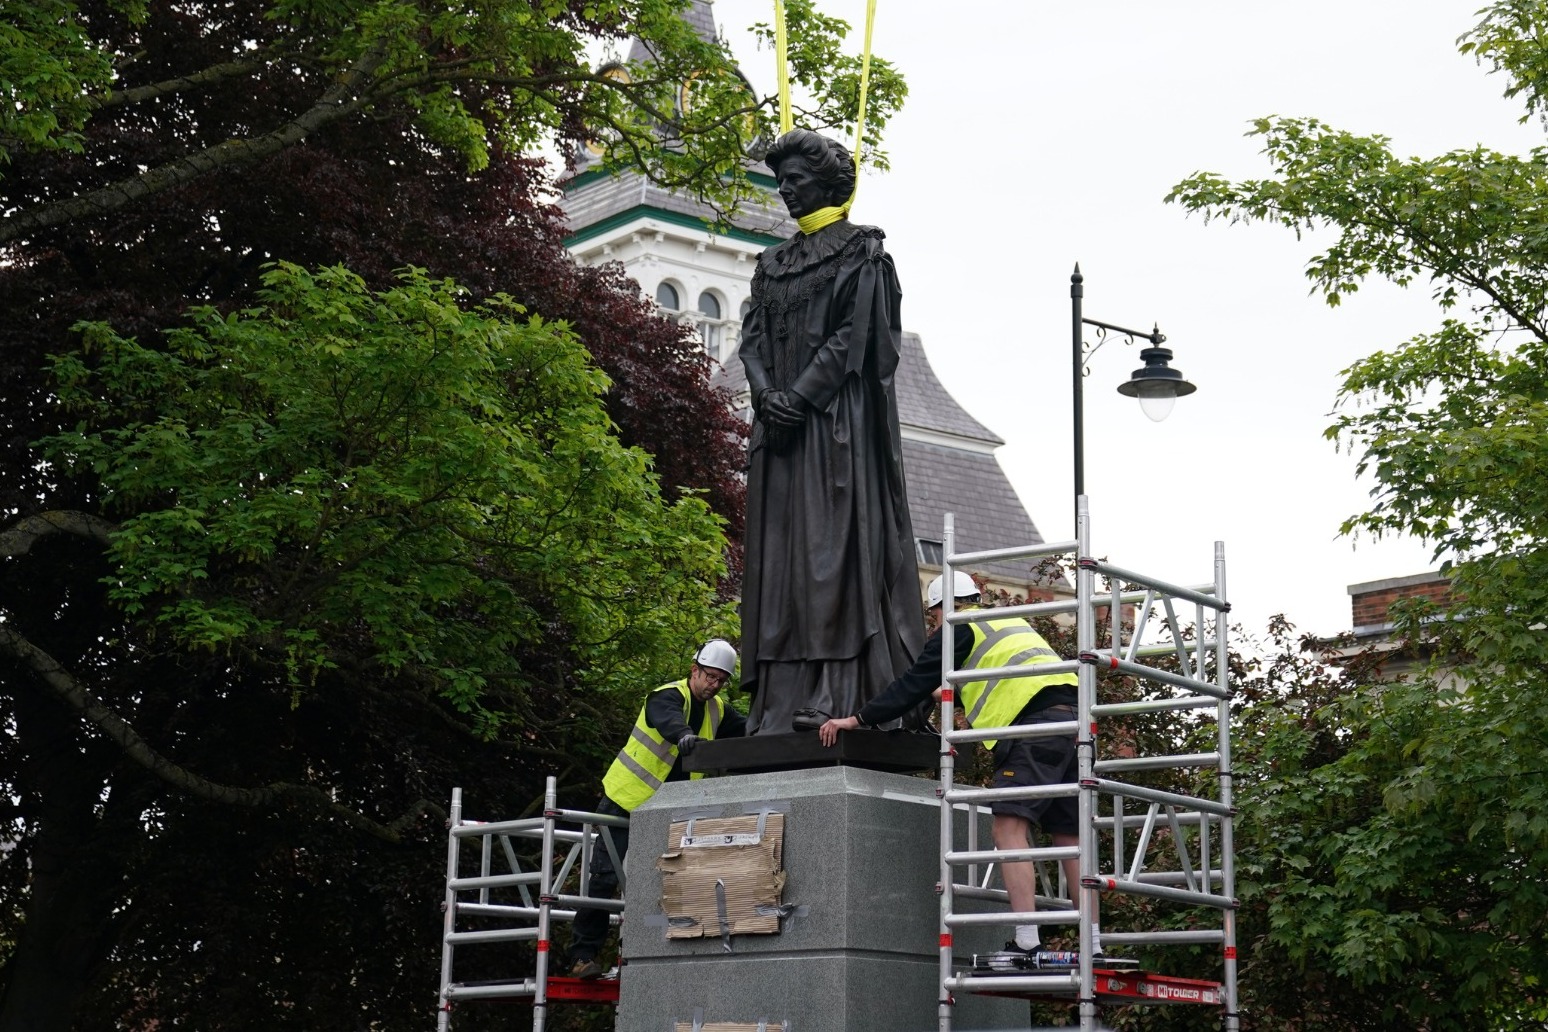 Thatcher statue lowered into place despite ‘egg-throwing’ threats 